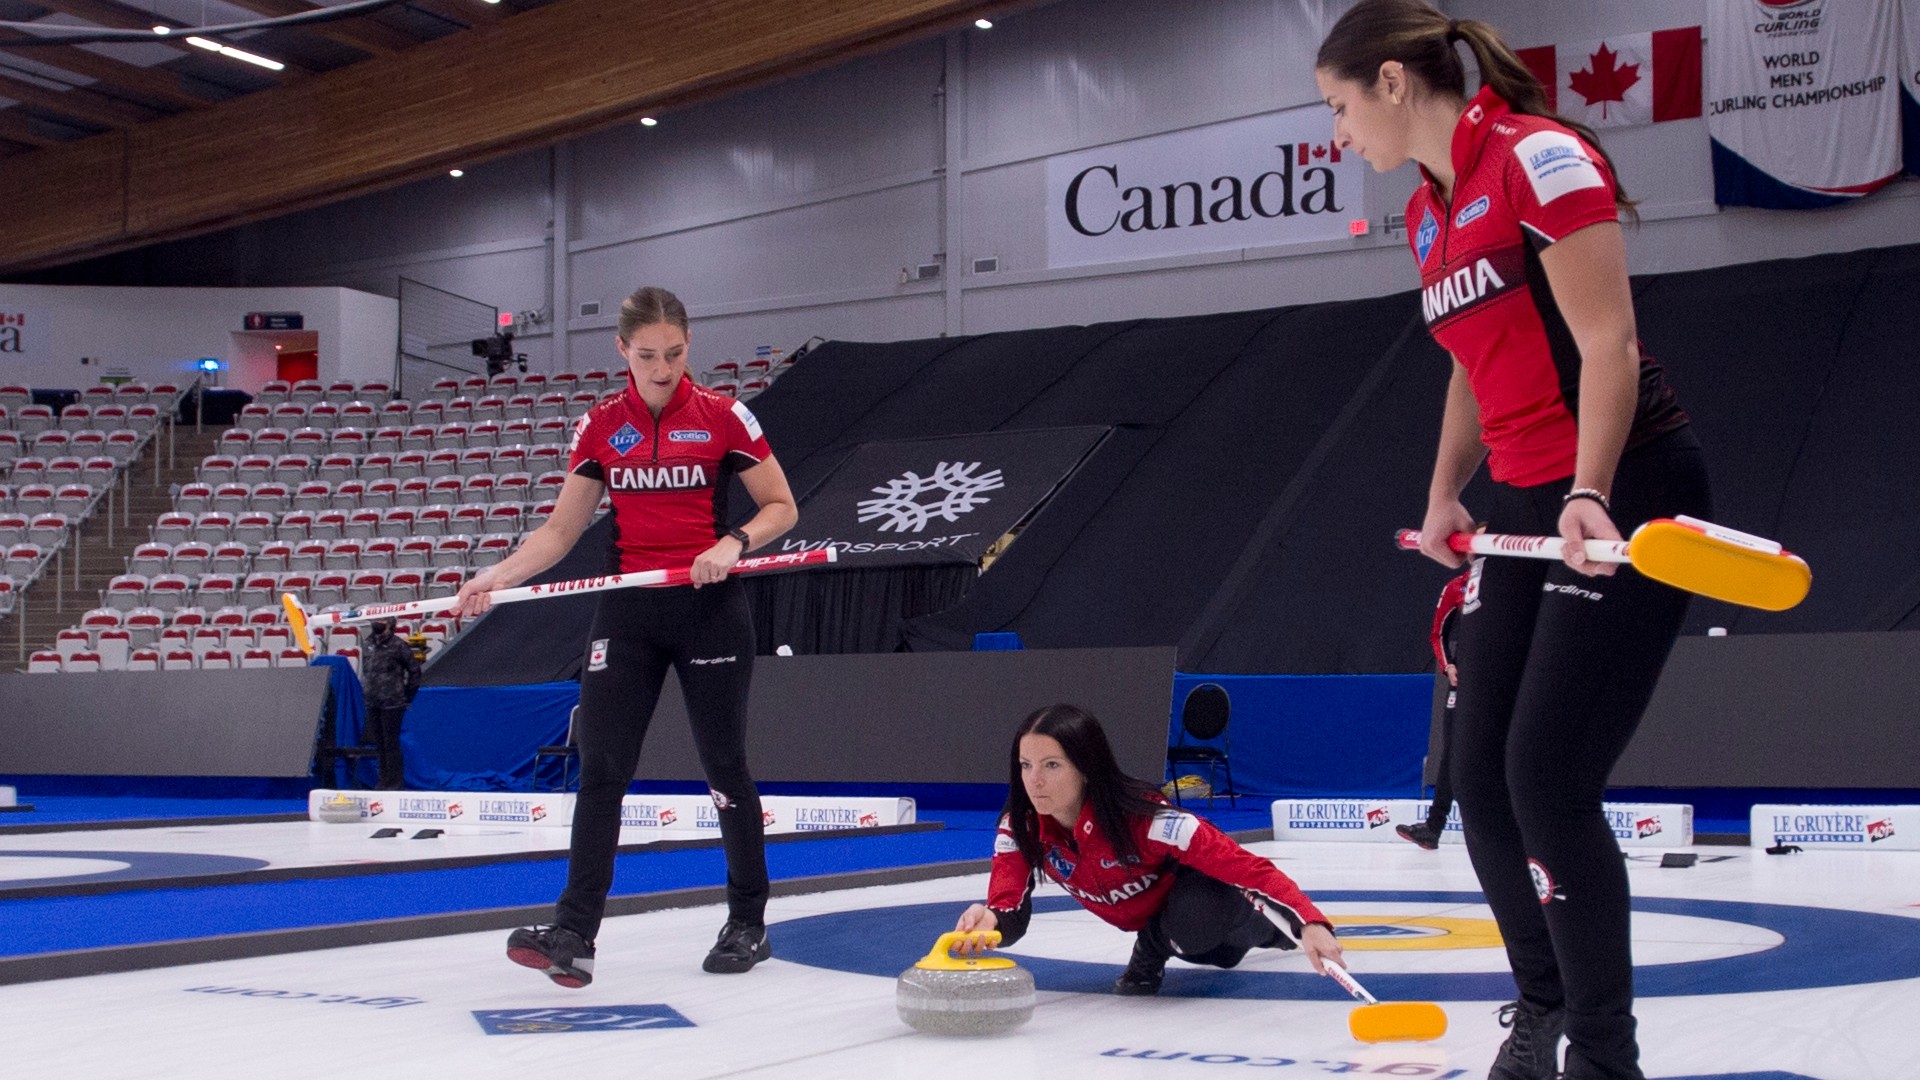 World Women’s Curling Championship 2021: Results, standings, schedule and TV channel